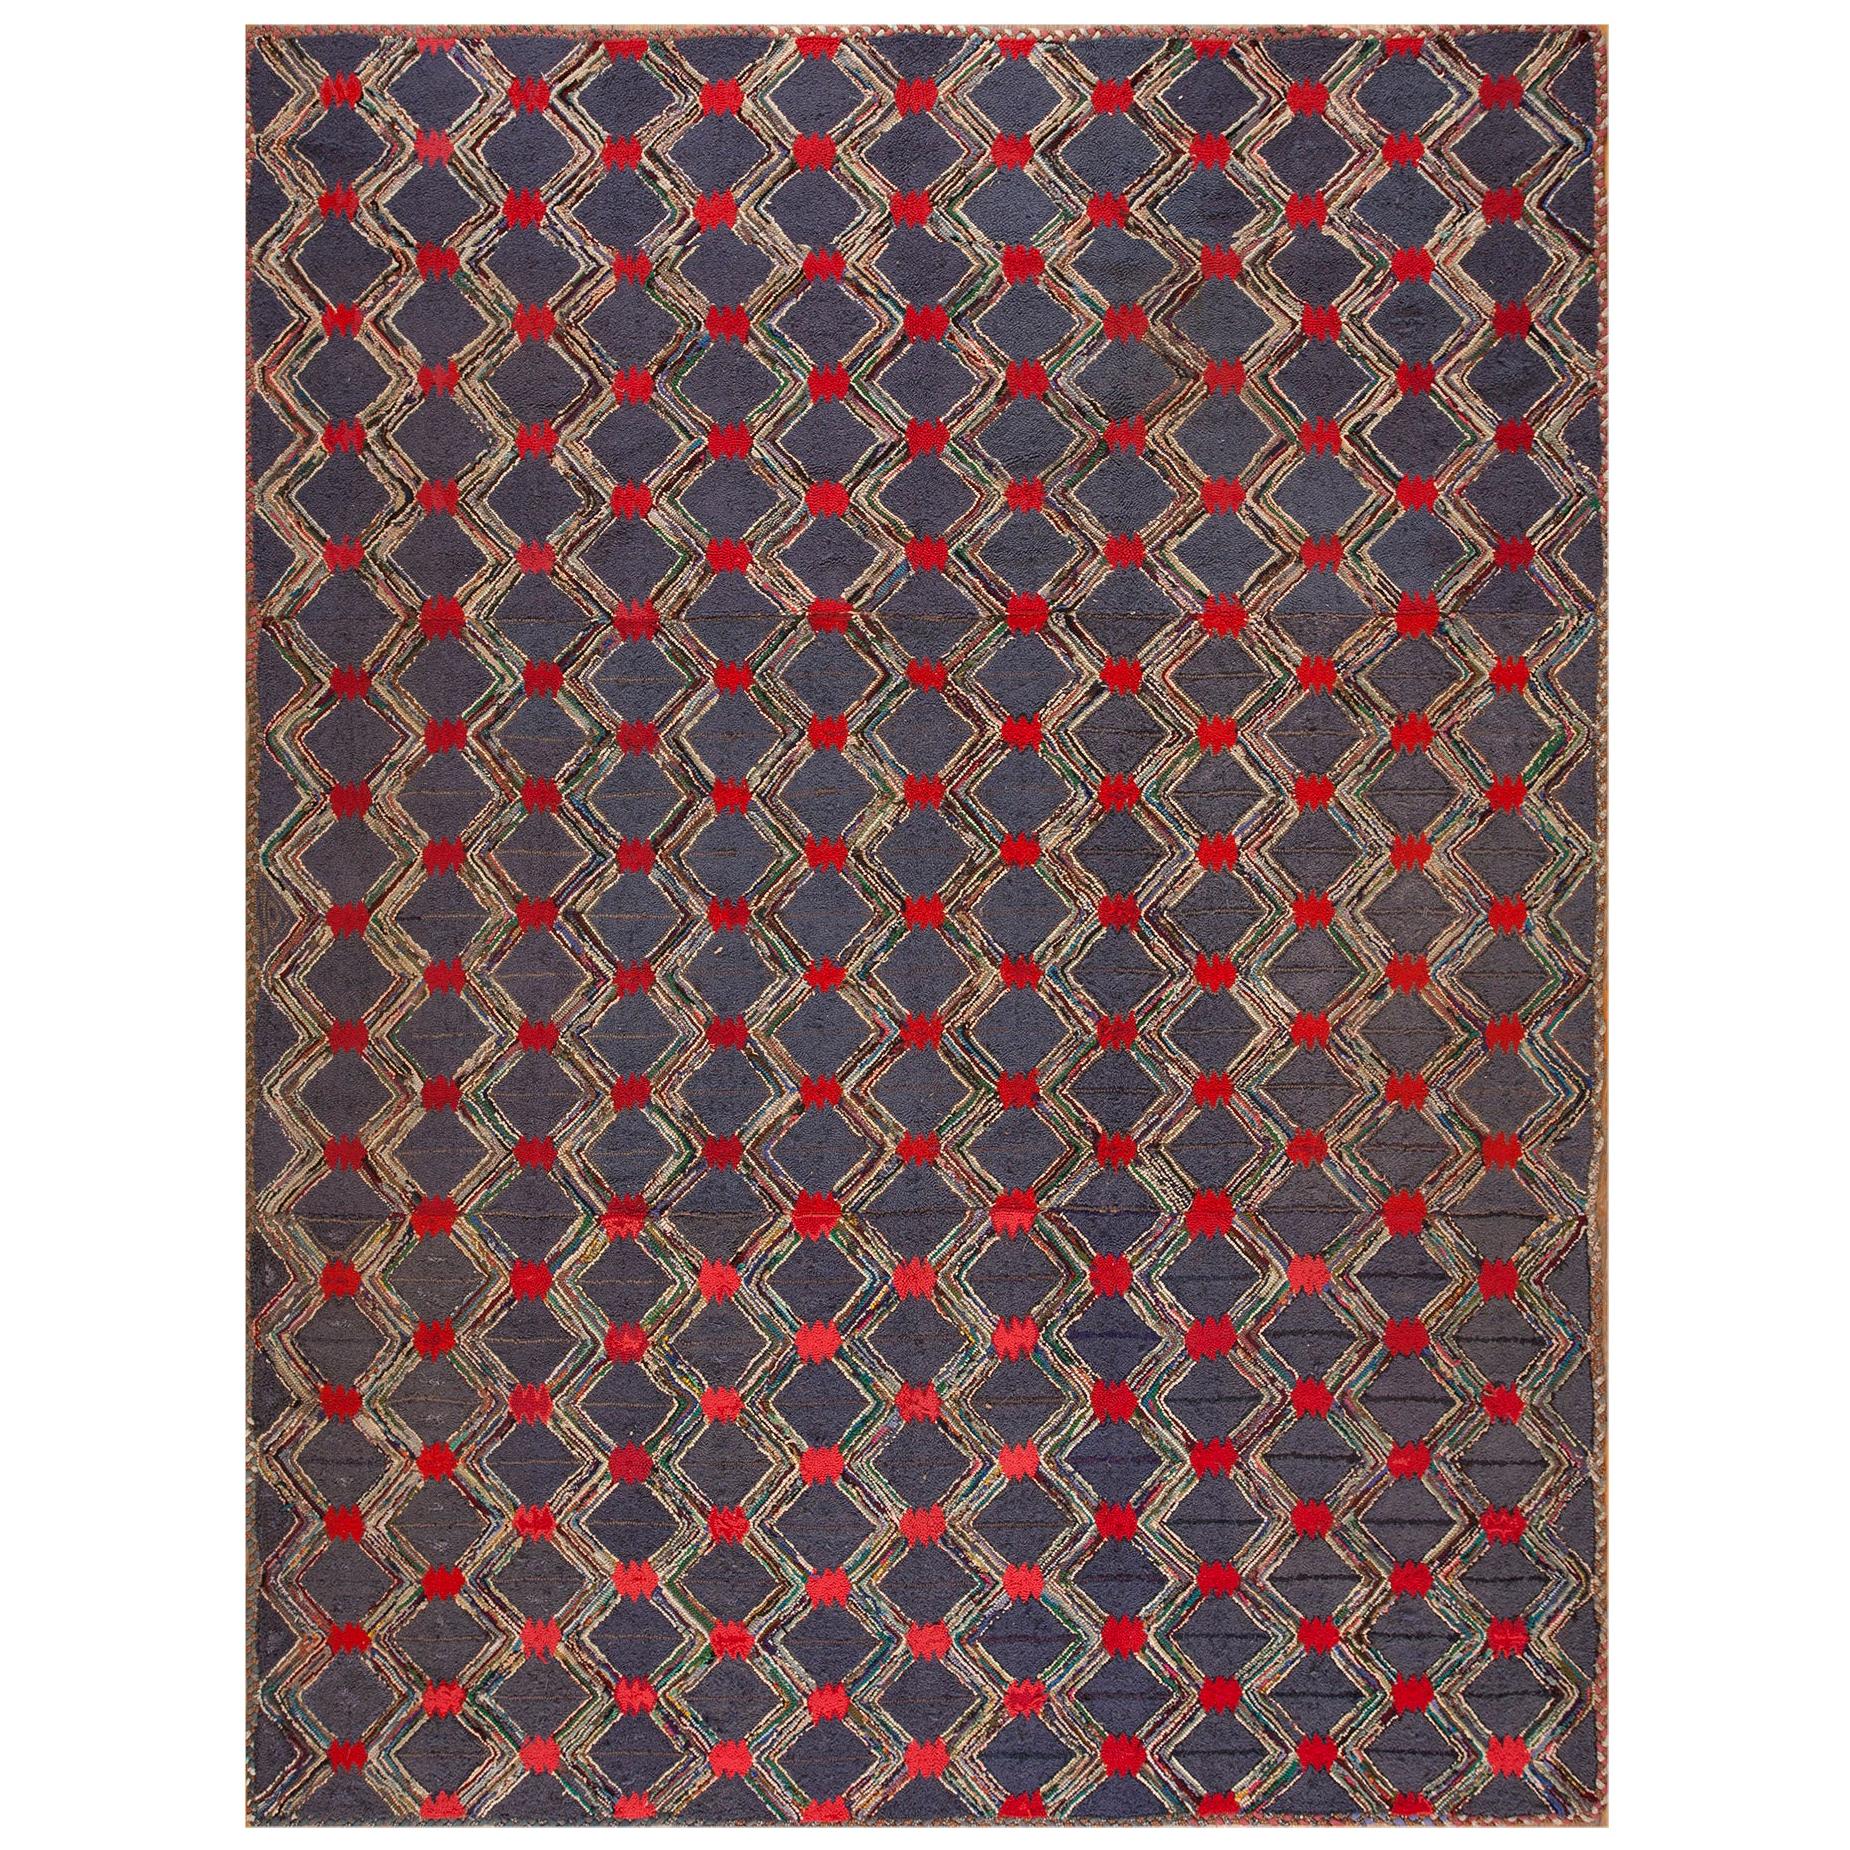 Mid 20th Century American Hooked Rug ( 8'6" x 11'6" - 260 x 350 )